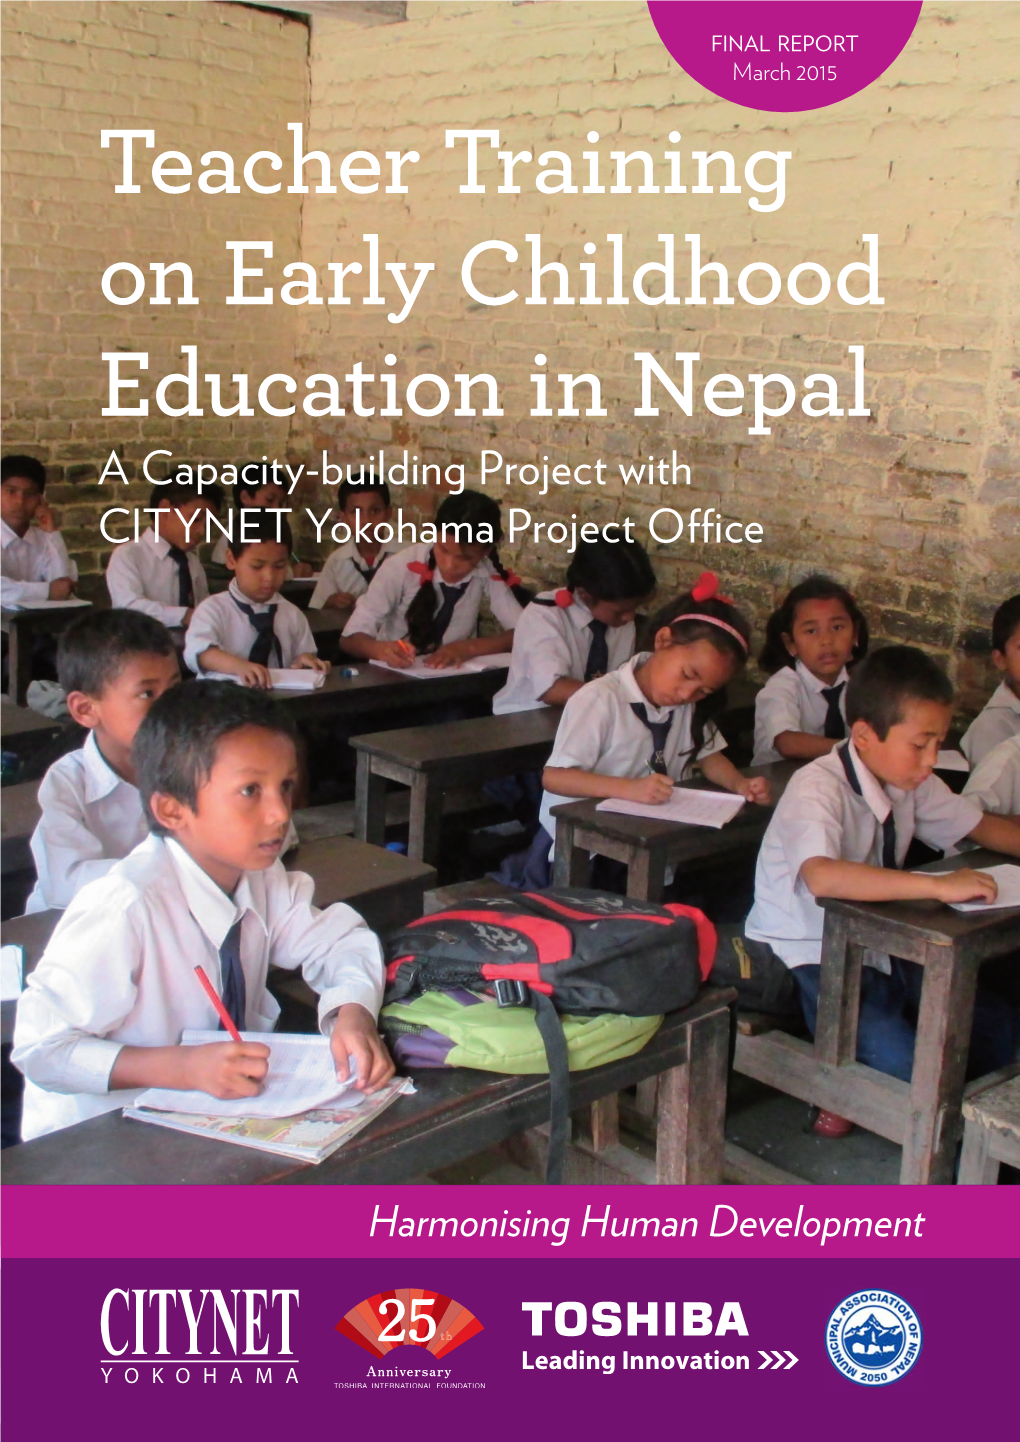 Teacher Training on Early Childhood Education in Nepal a Capacity-Building Project with CITYNET Yokohama Project Office